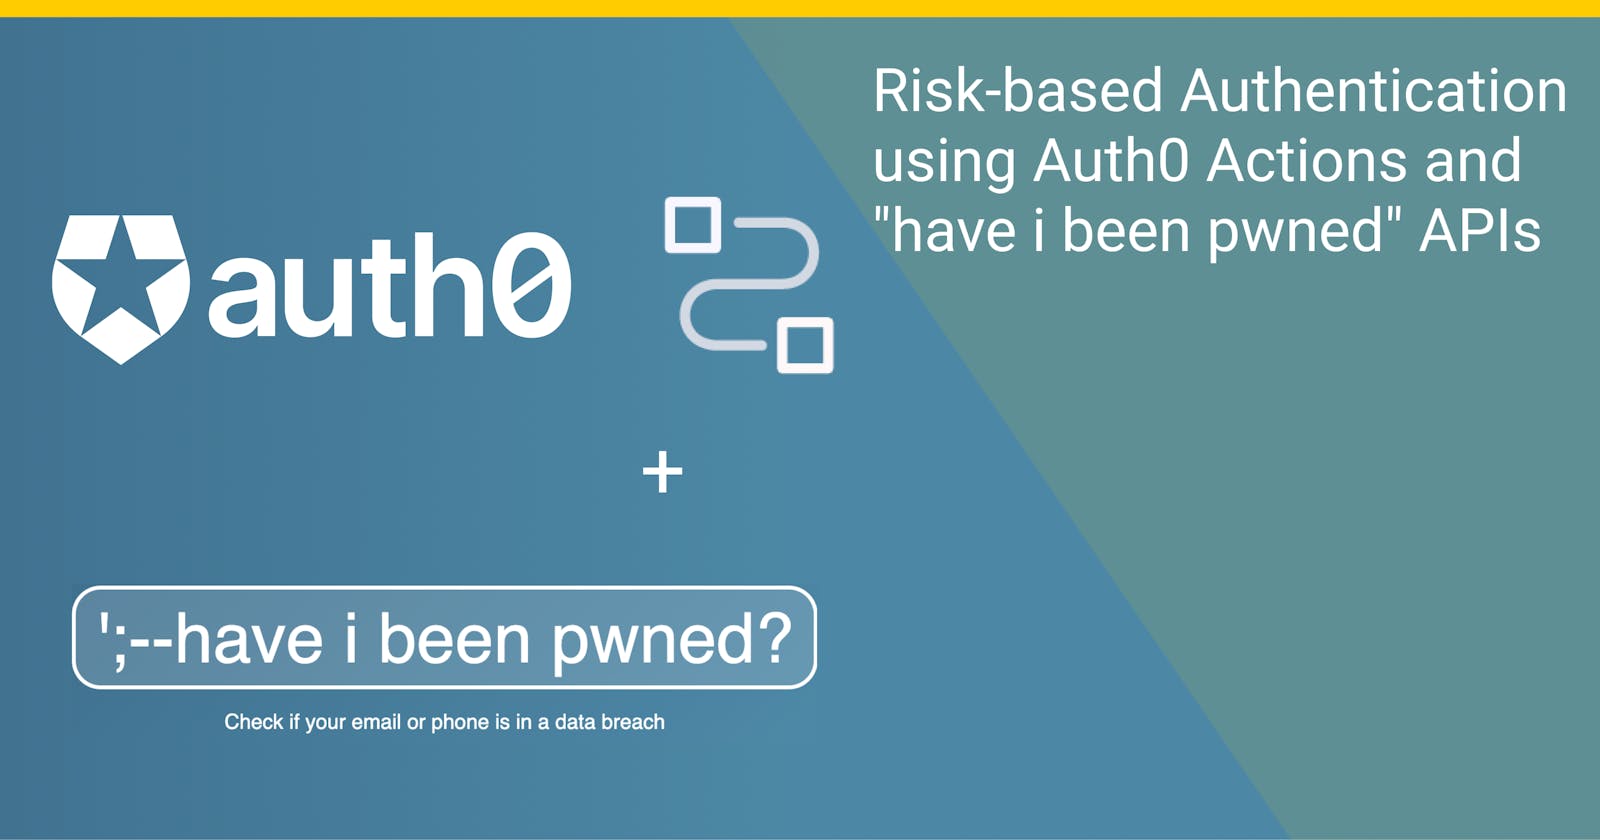 Risk-based Authentication using Auth0 Actions and "have i been pwned" APIs